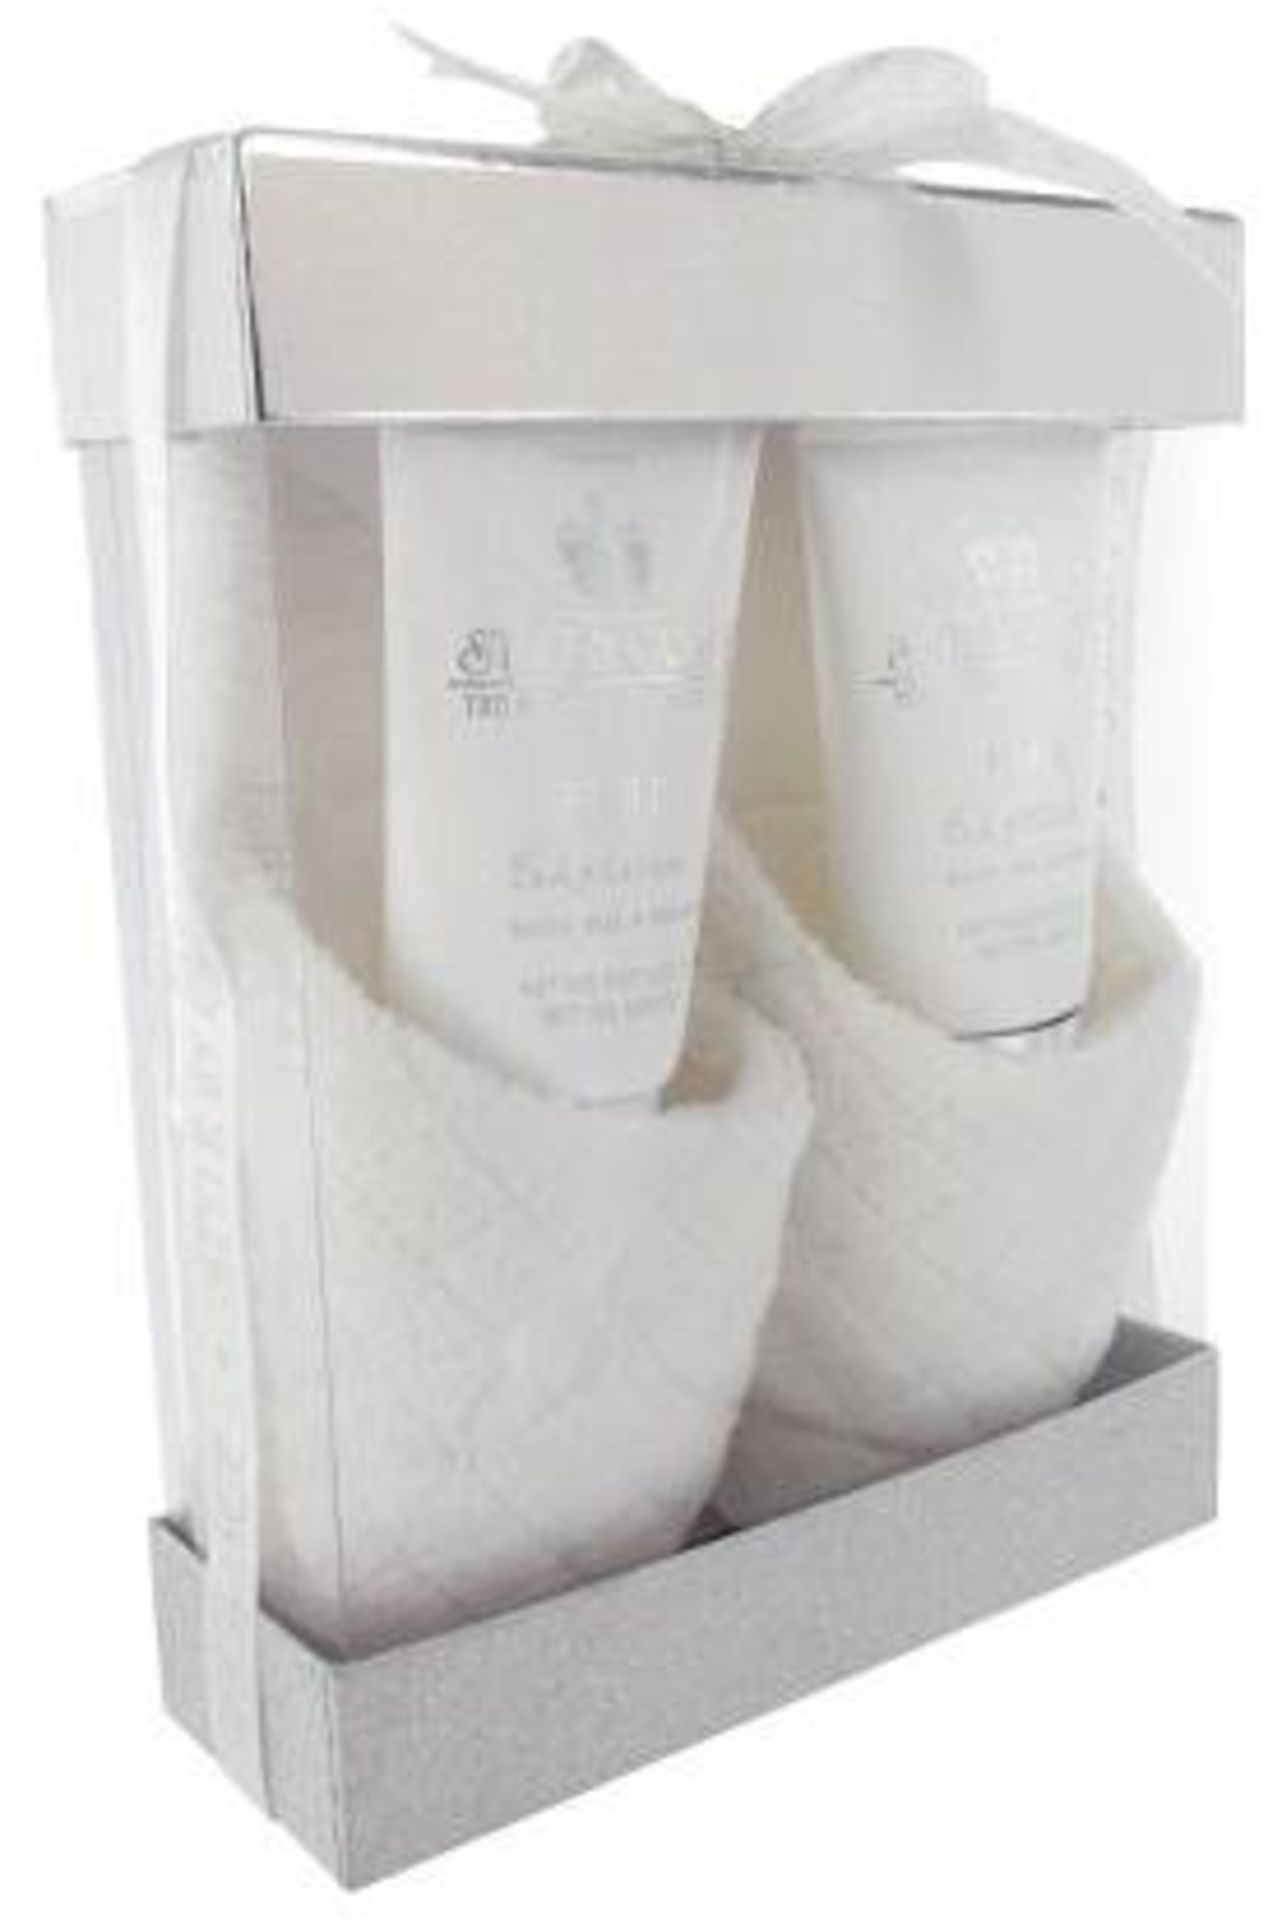 V Brand New Style and Grace Puro Pure Bliss Slipper Gift Set inc 150ml Body Wash 150ml Body Lotion